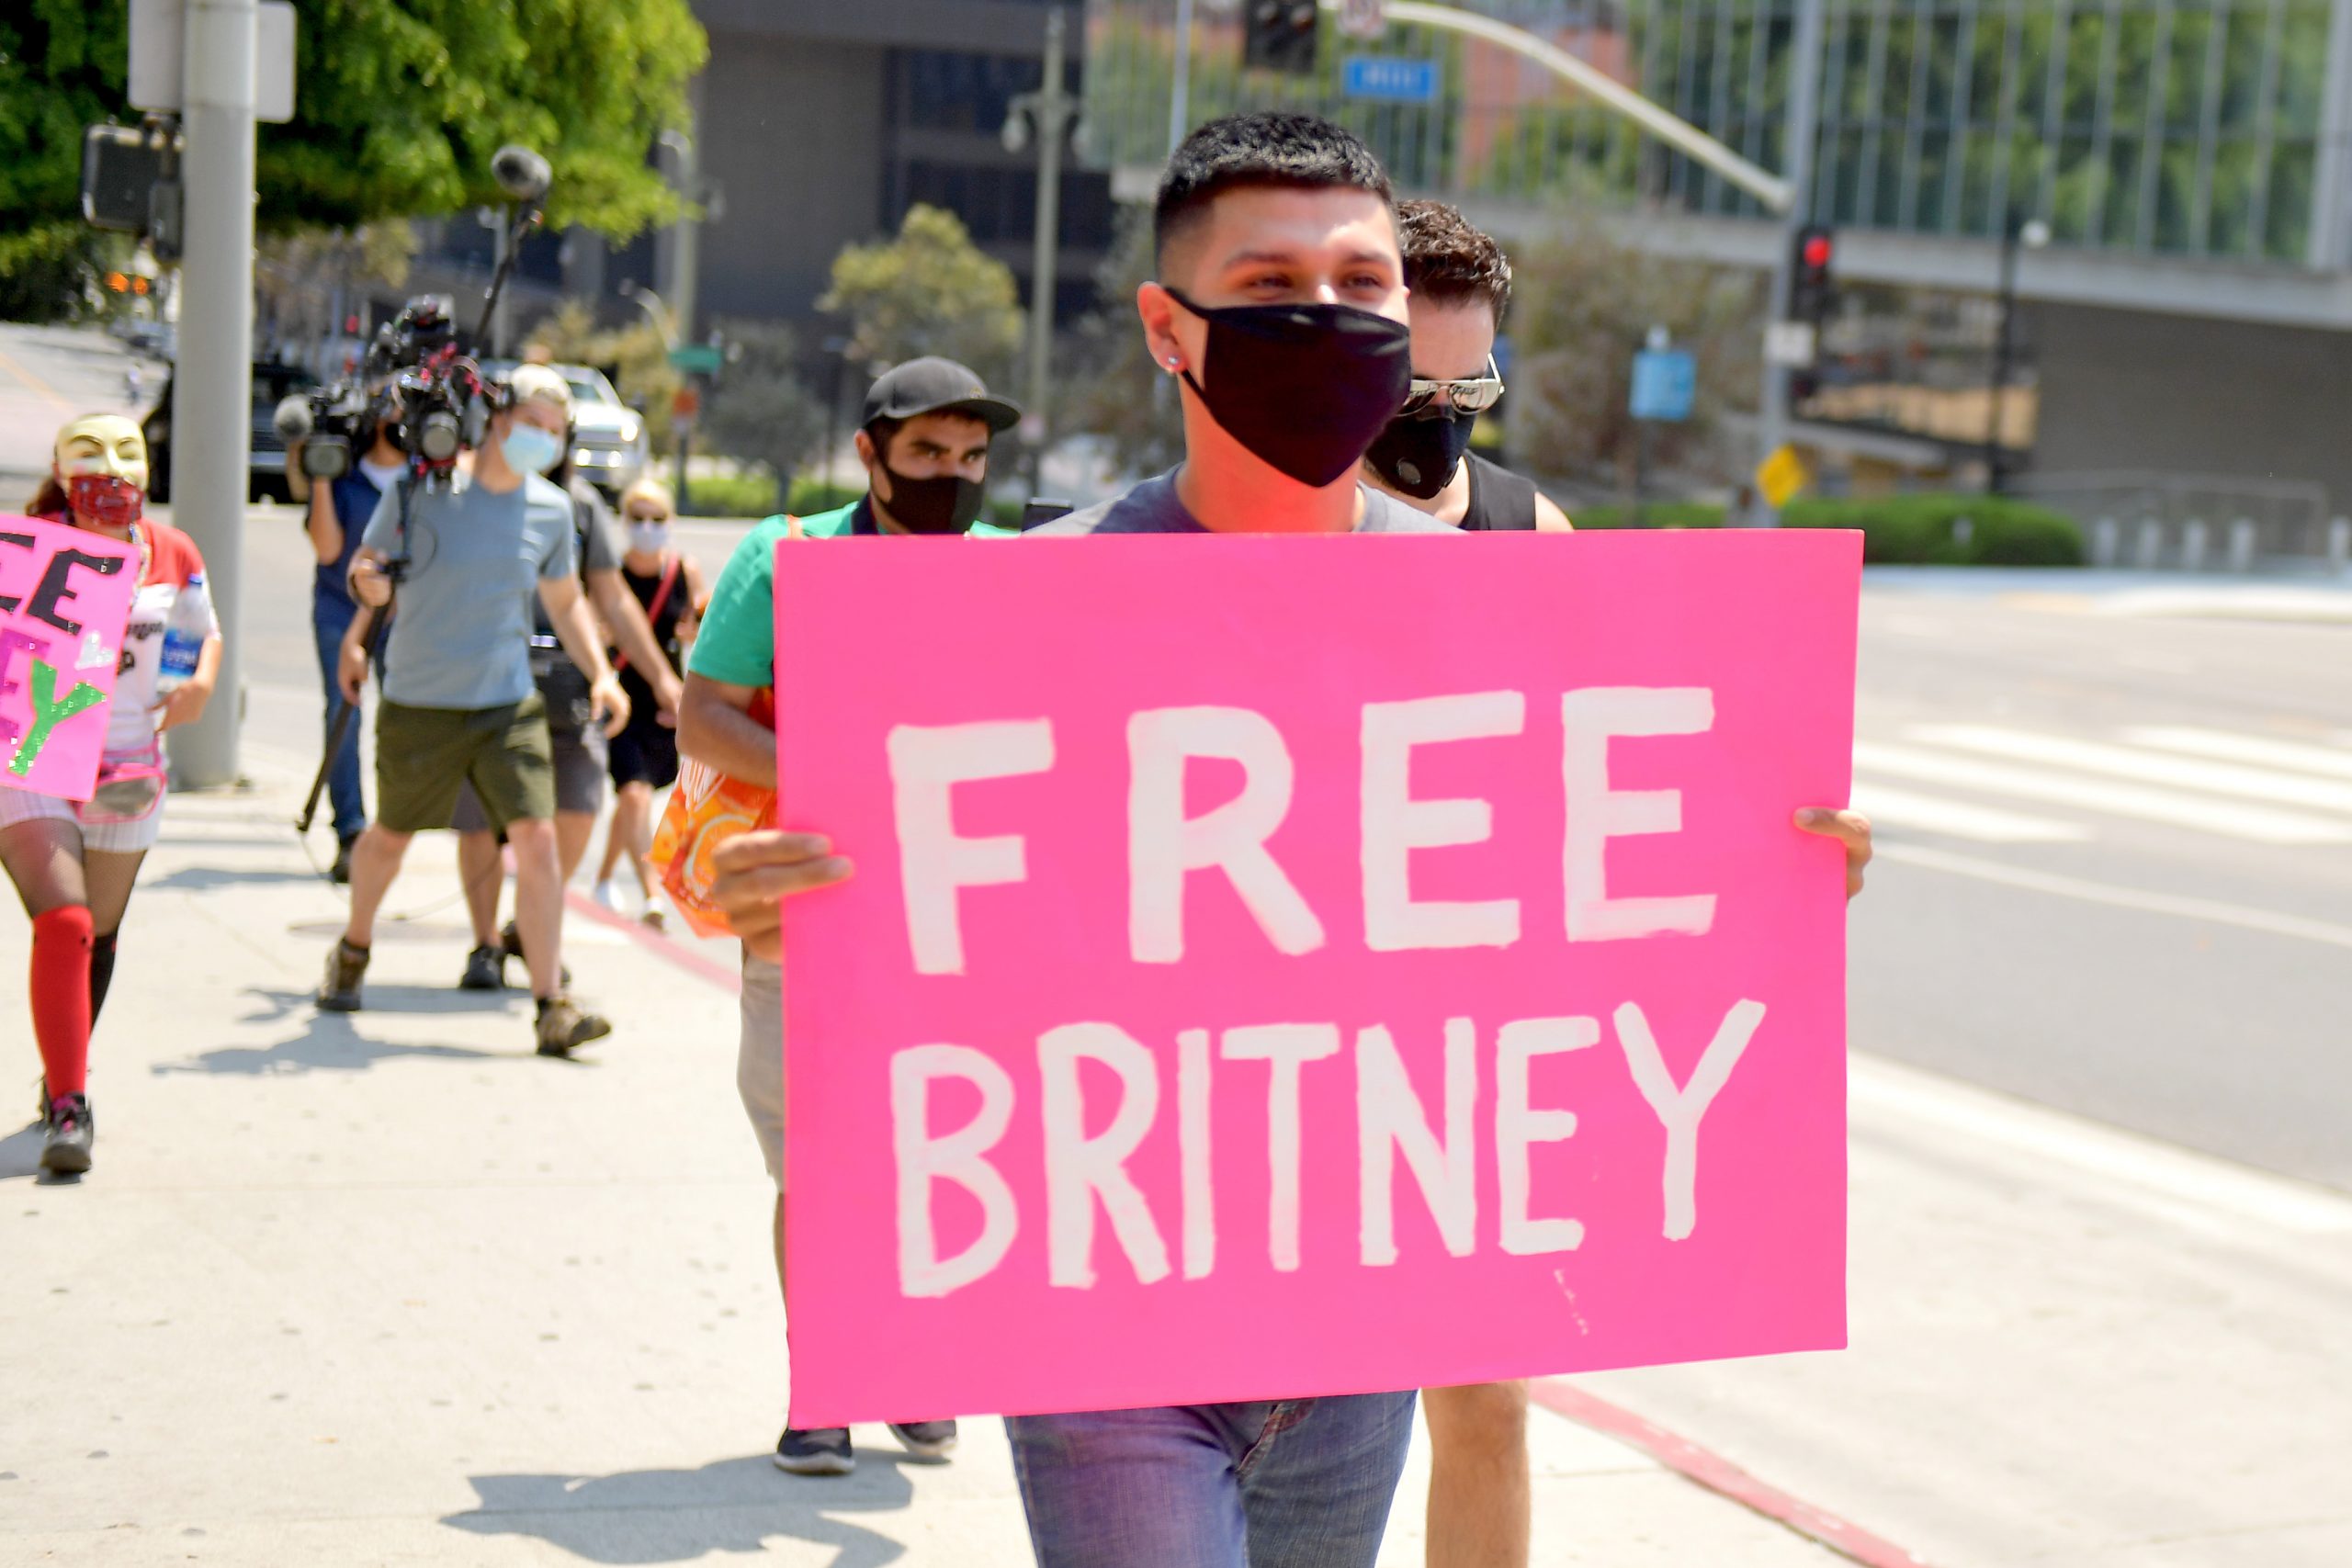 #FreeBritney protestors outside the courthouse during a status hearing  for Britney Spears' conservatorship